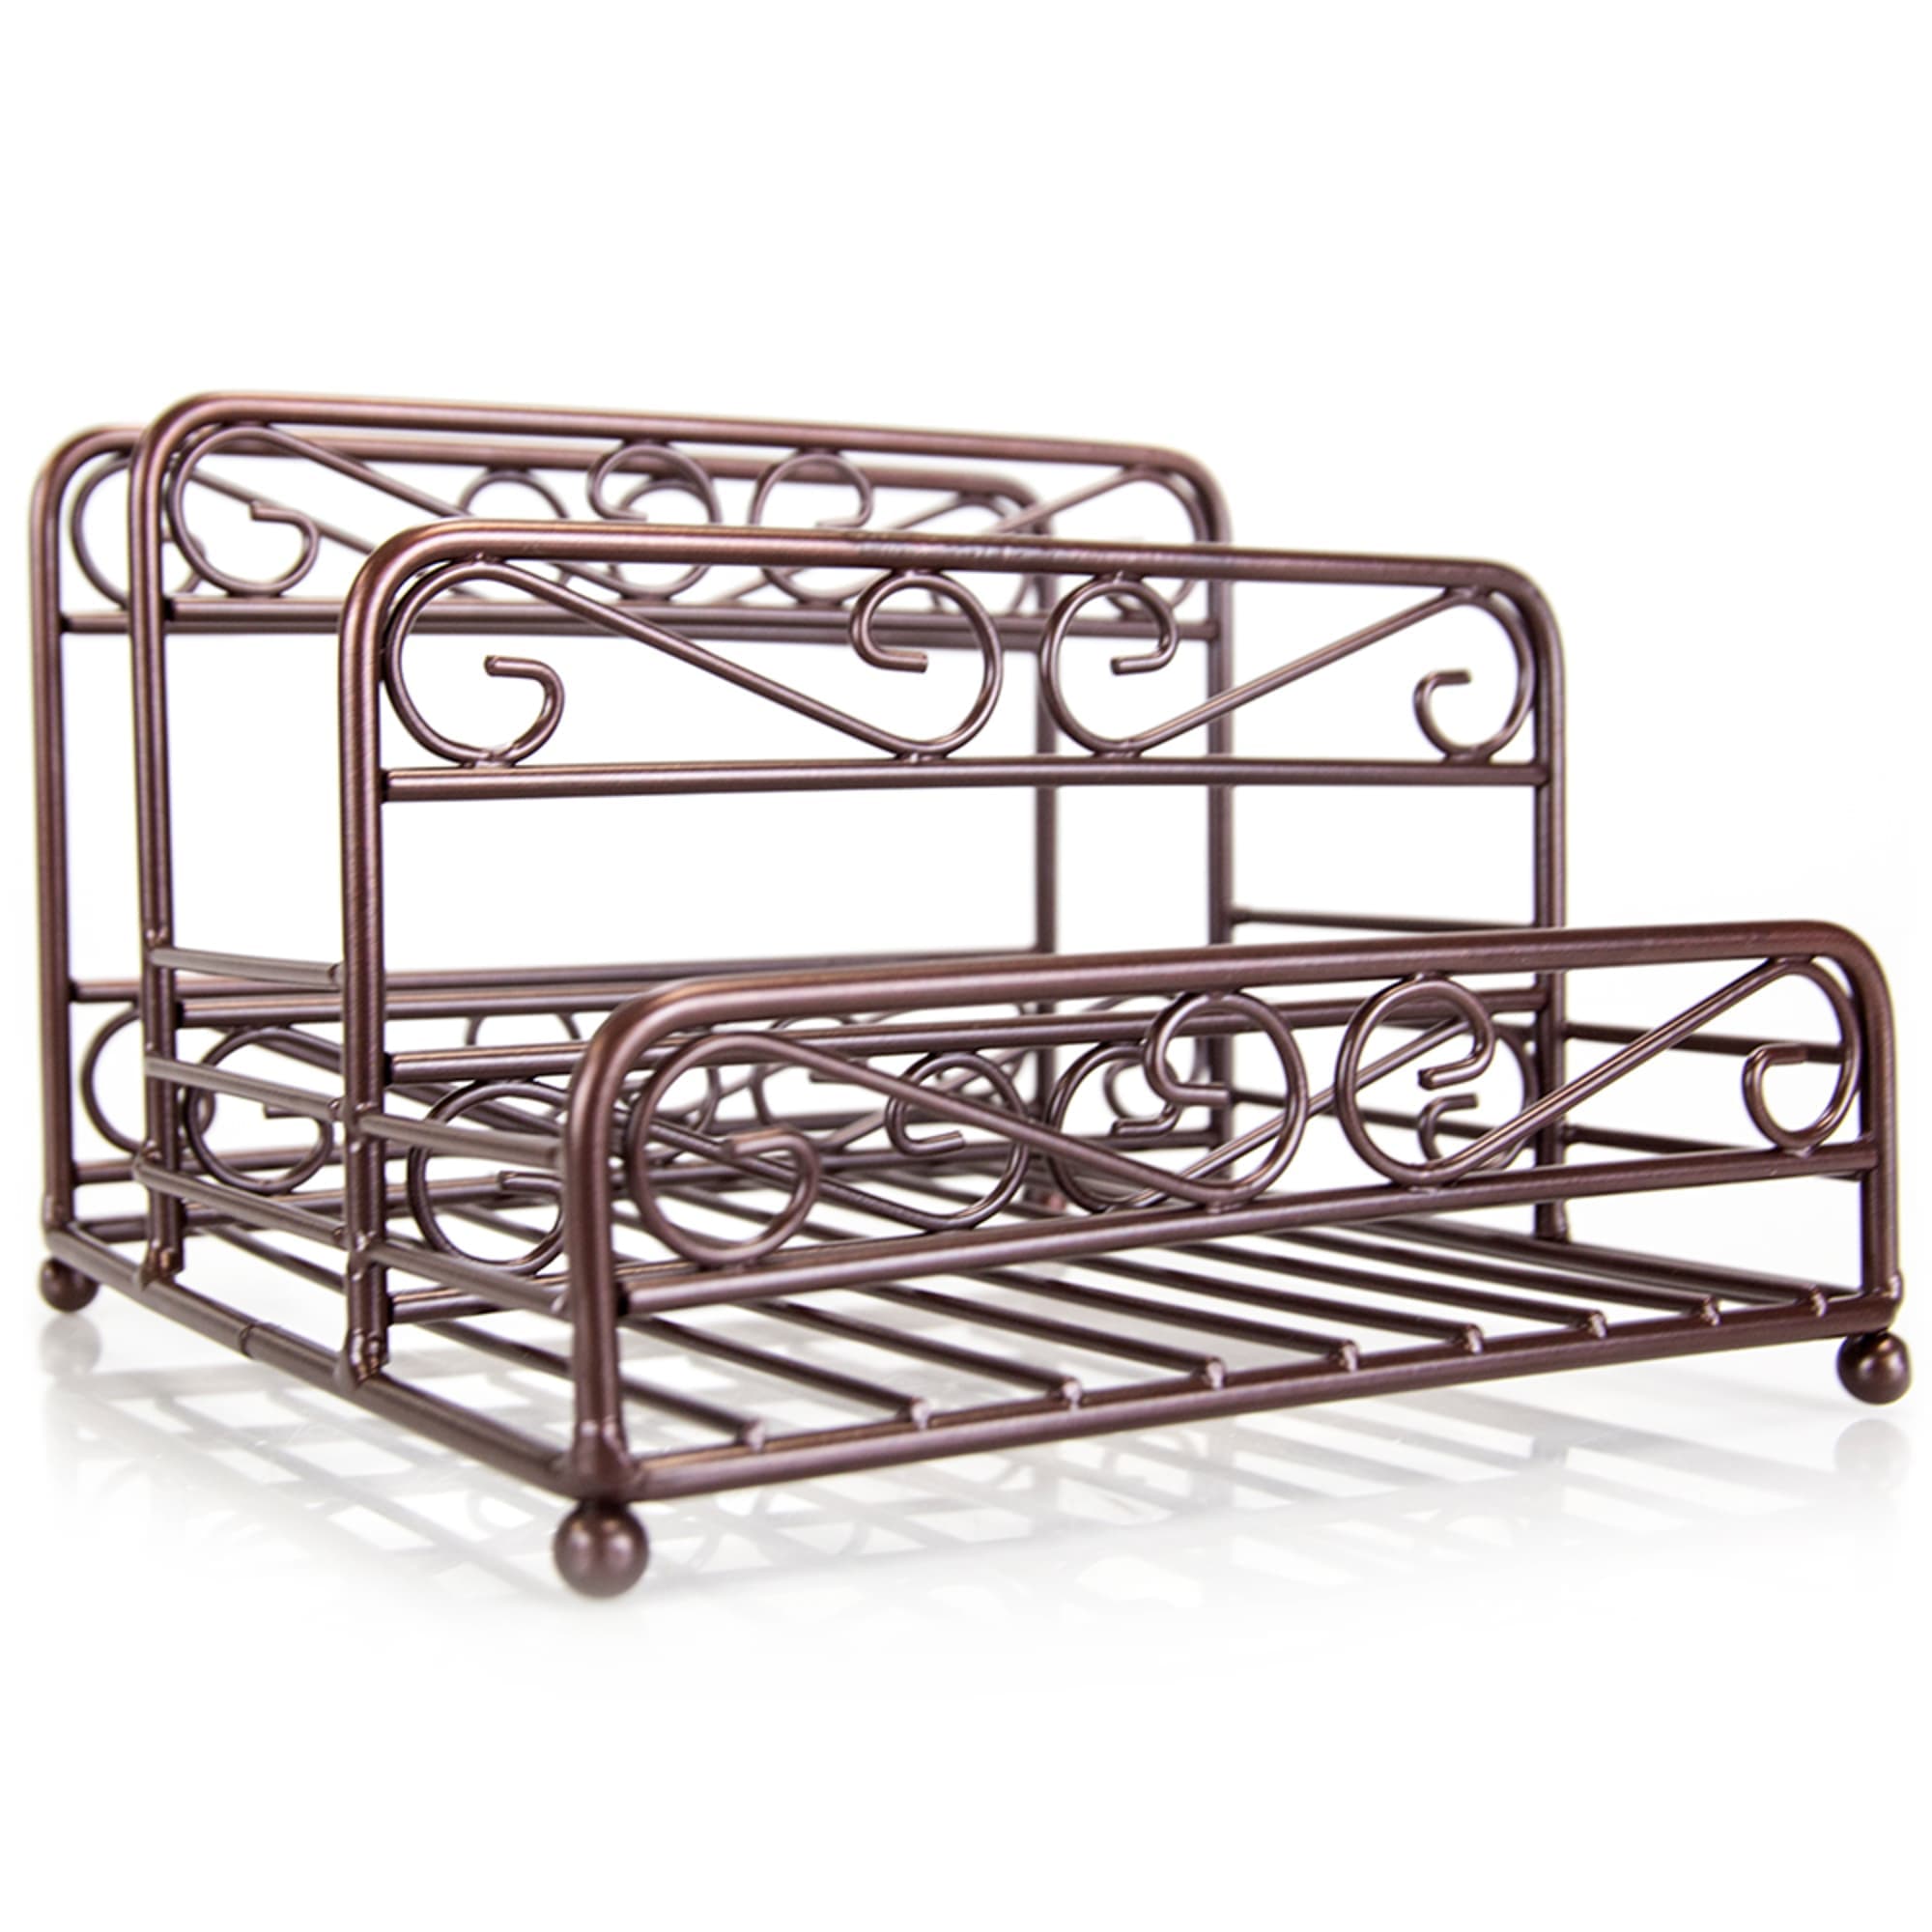 Home Basics Scroll Collection Steel Salt And Pepper Napkin Caddy, Bronze $6.50 EACH, CASE PACK OF 12